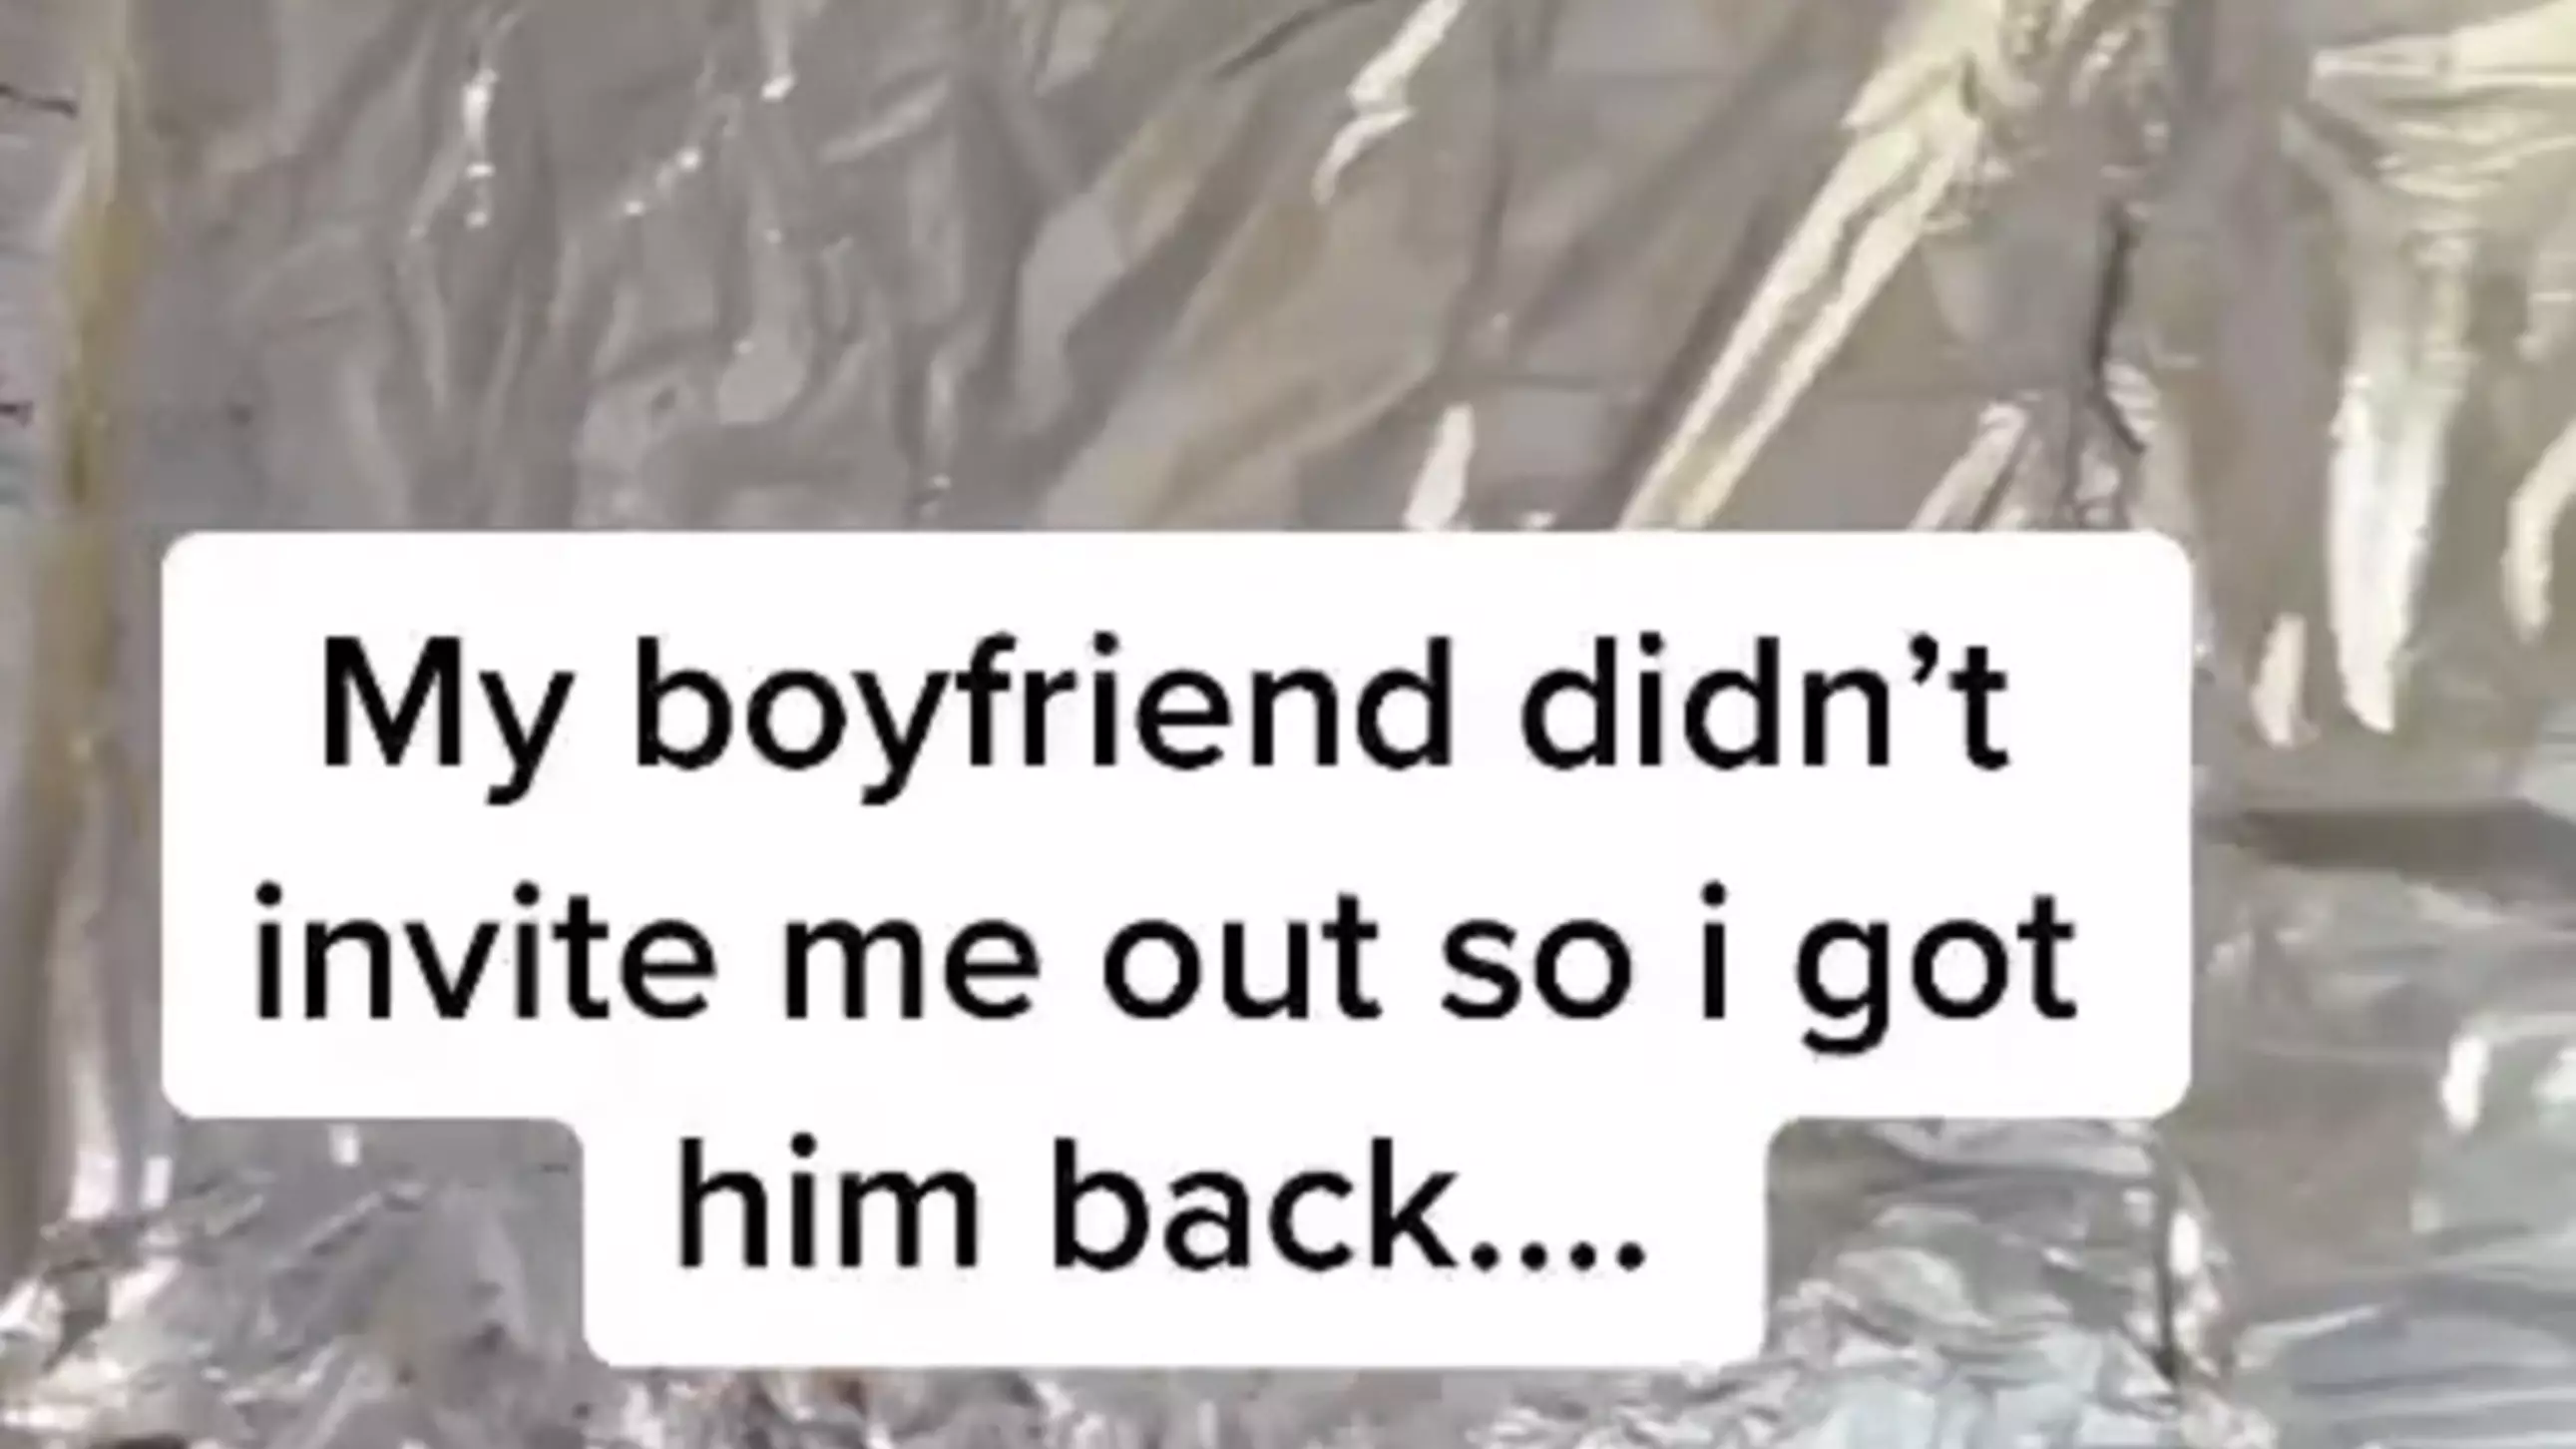 Woman Pranks Her Boyfriend By Covering His Bedroom In Tin Foil